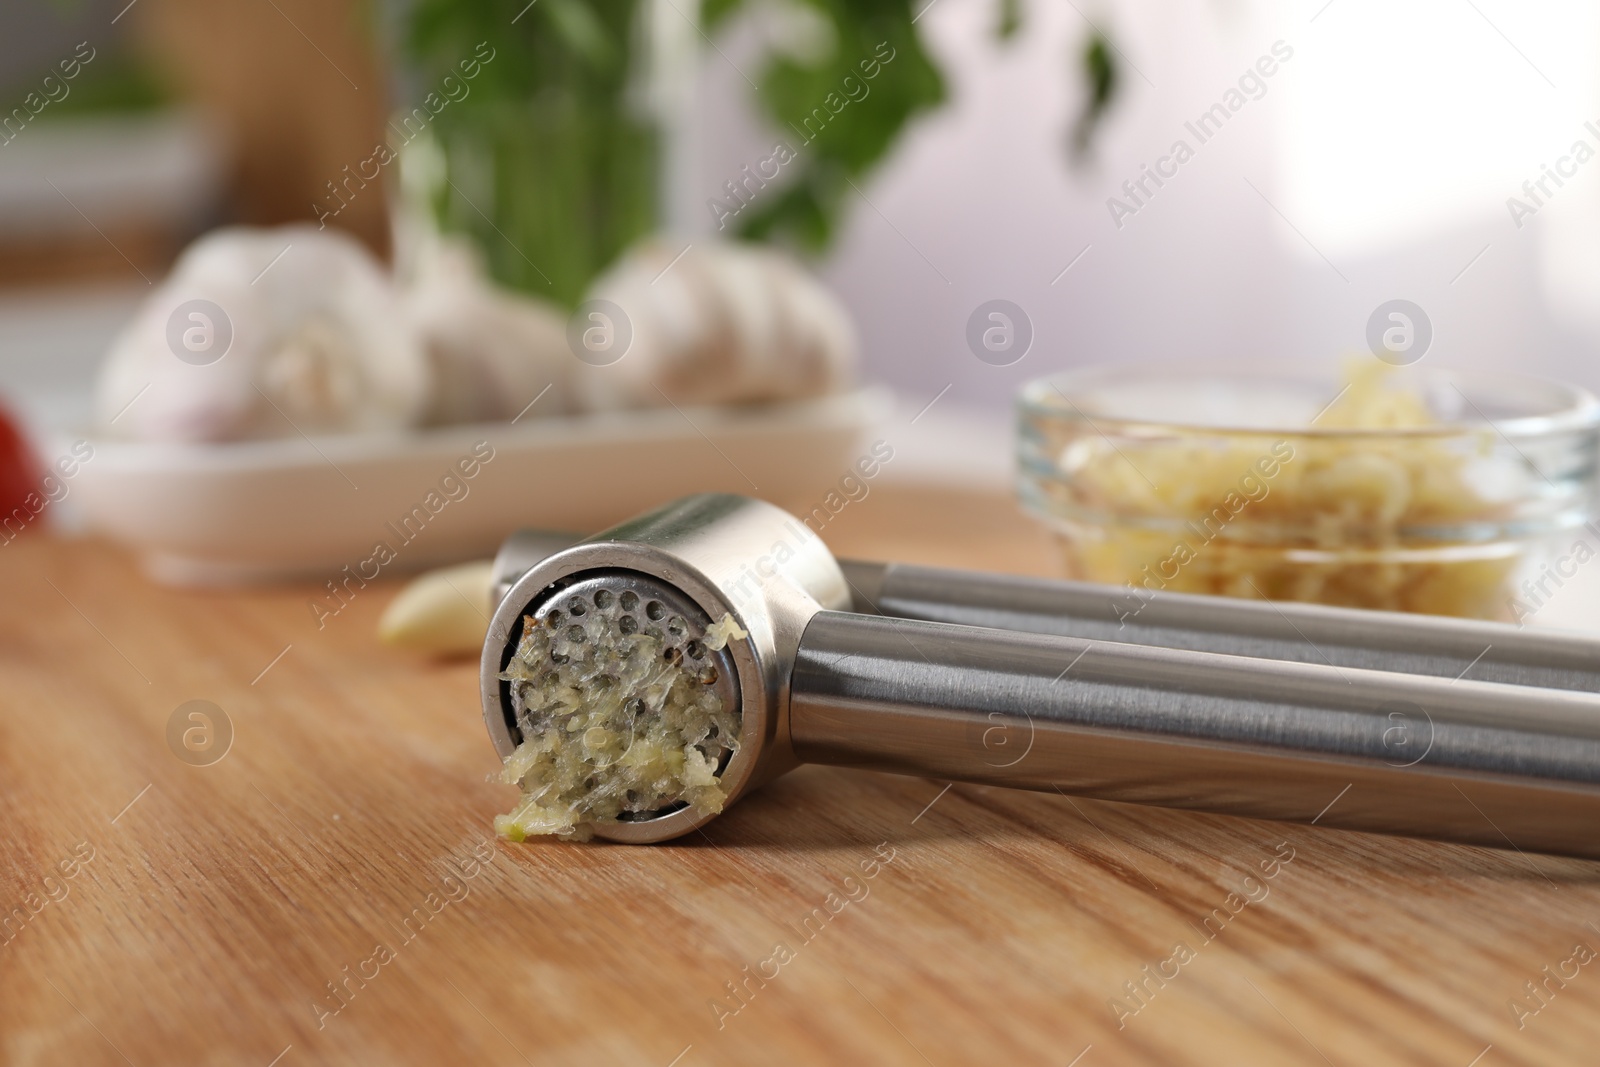 Photo of Garlic press with mince on wooden table indoors, closeup